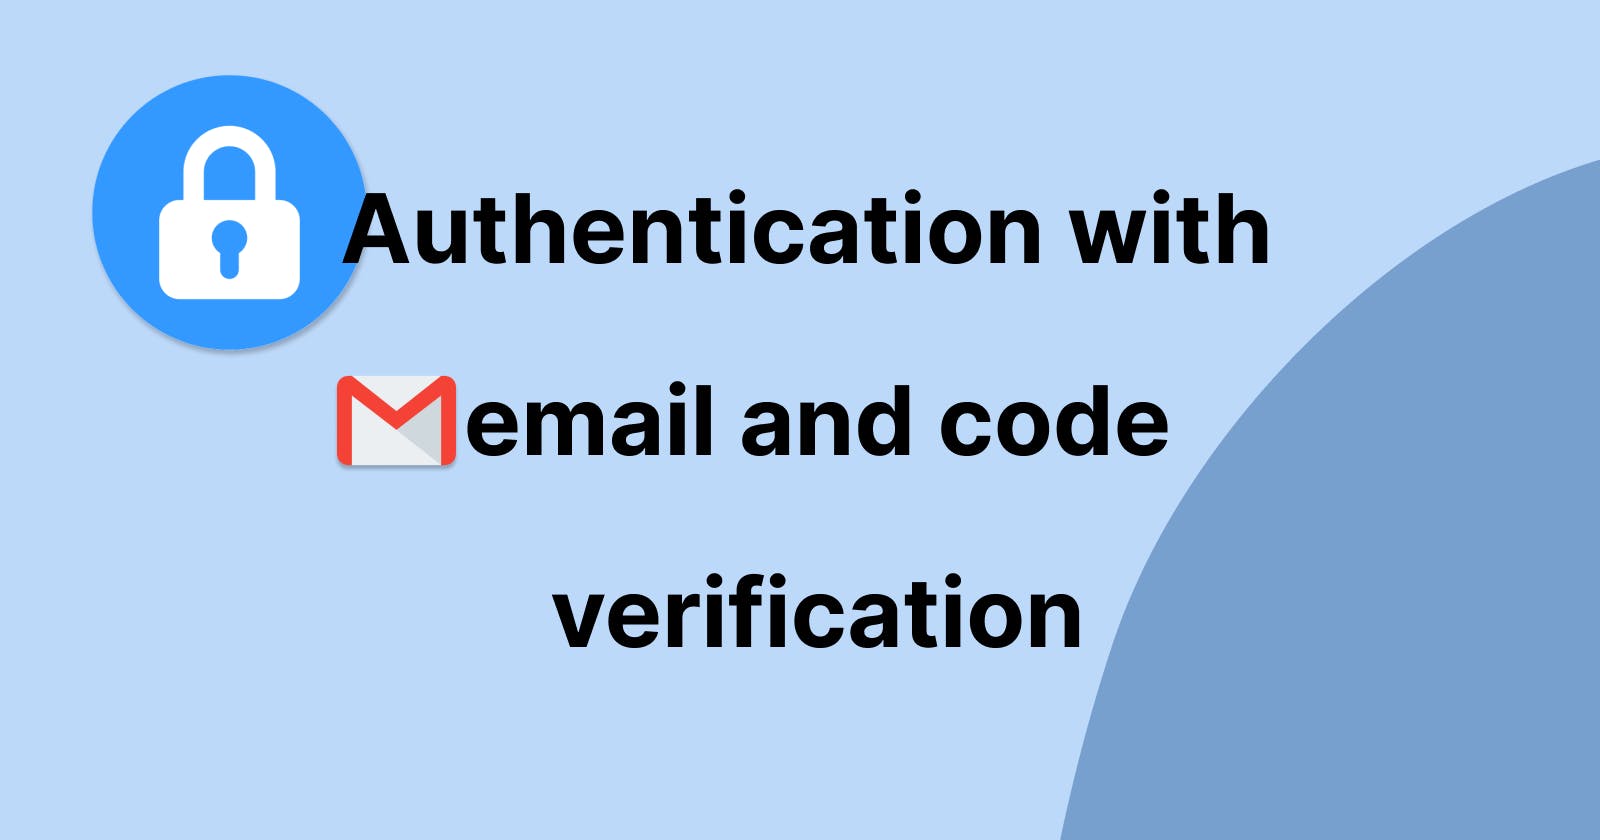 Authentication with email and code verification